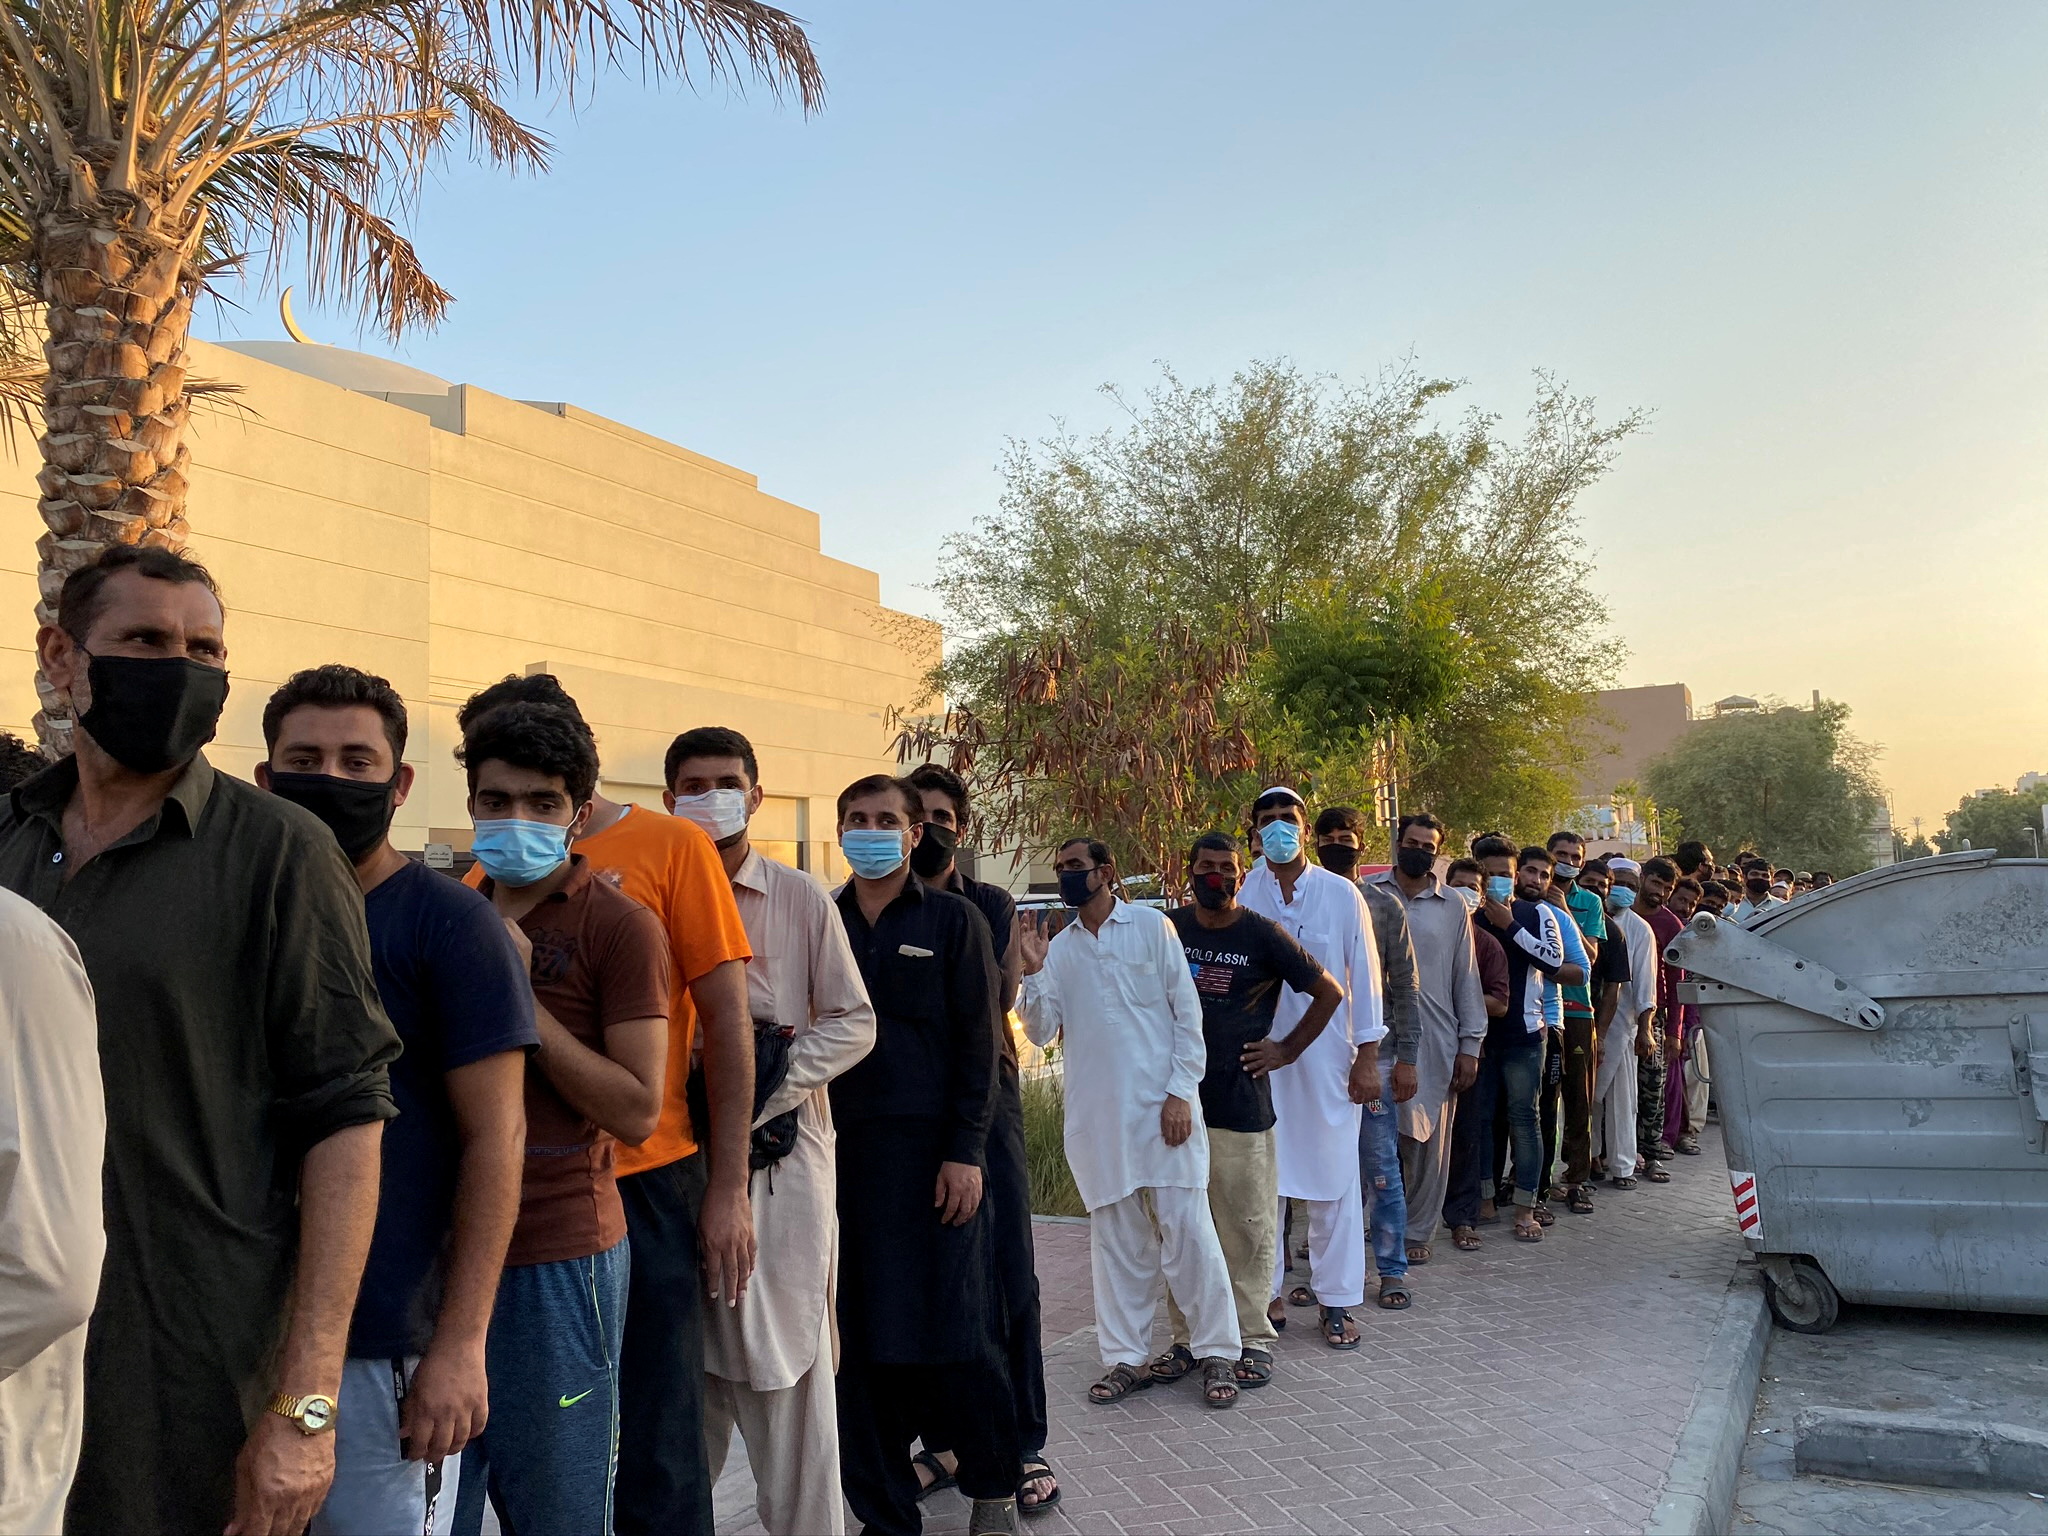 Unemployed men queue for food handouts from concerned local residents after they lost incomes due to the coronavirus disease (COVID-19) pandemic in Dubai